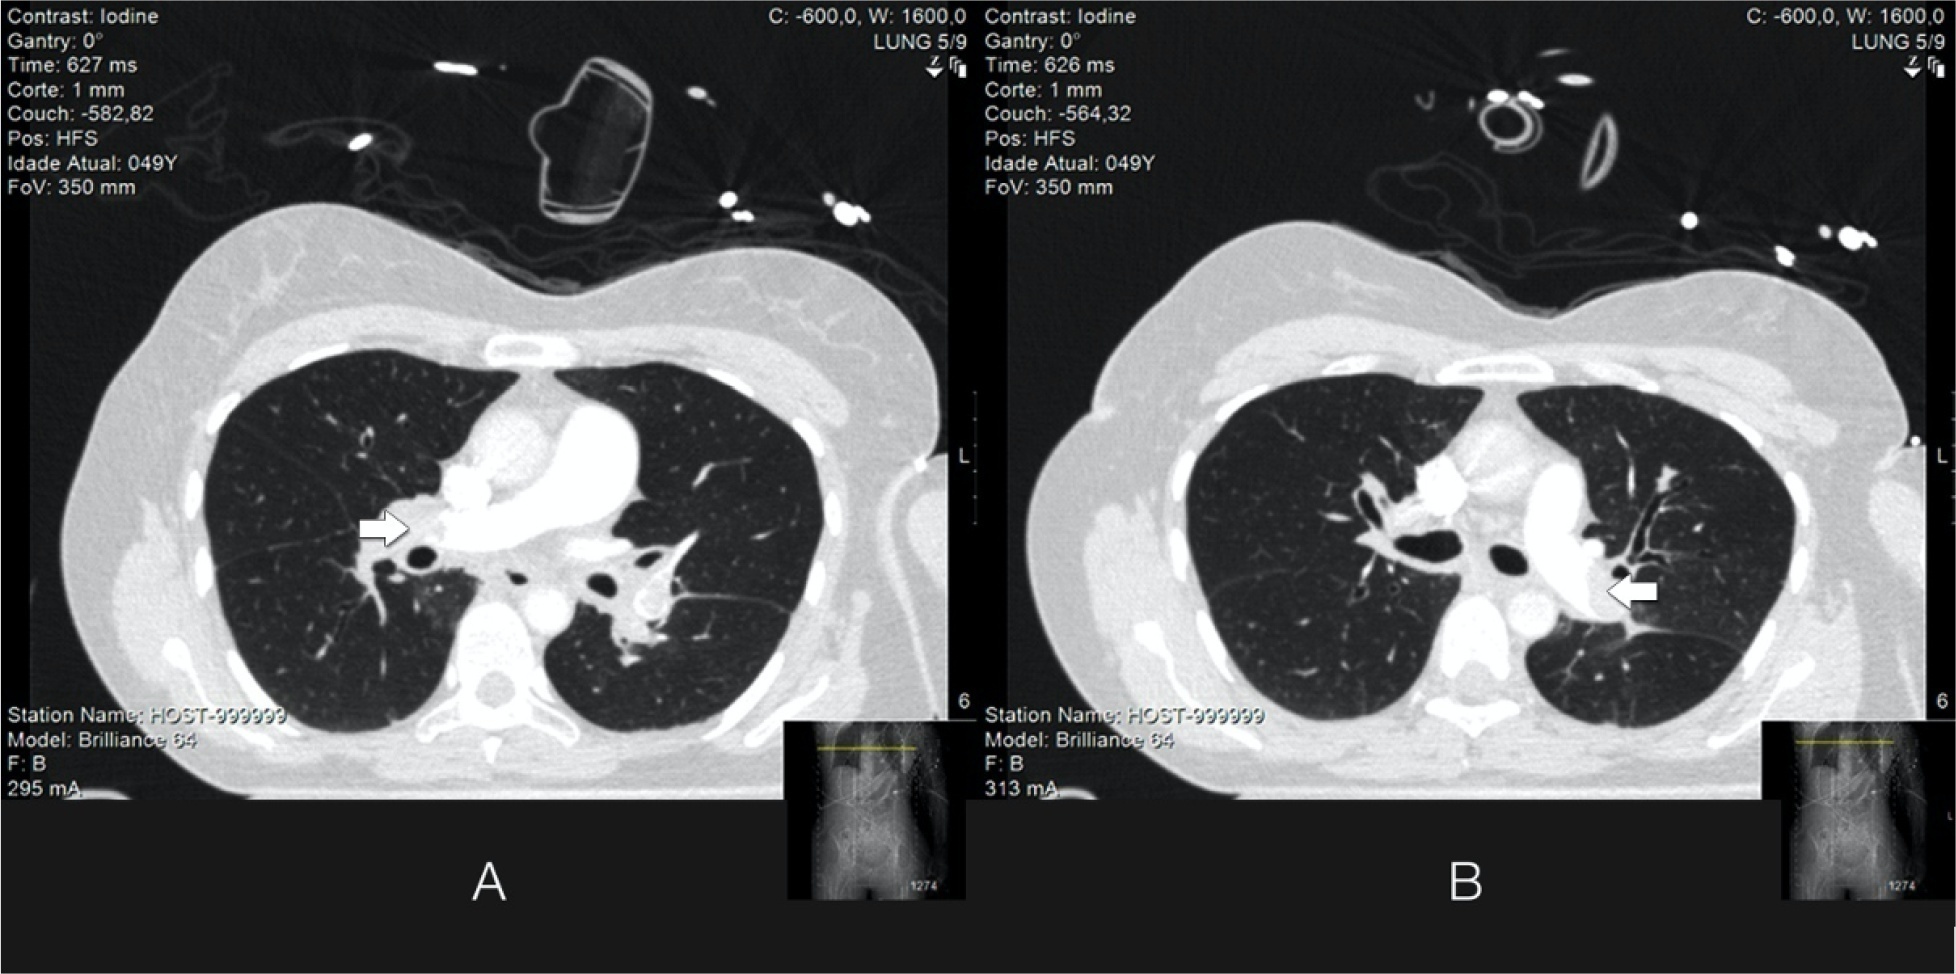 Extracorporeal mechanical support and aspiration thrombectomy in treatment of massive pulmonary embolism: a case report